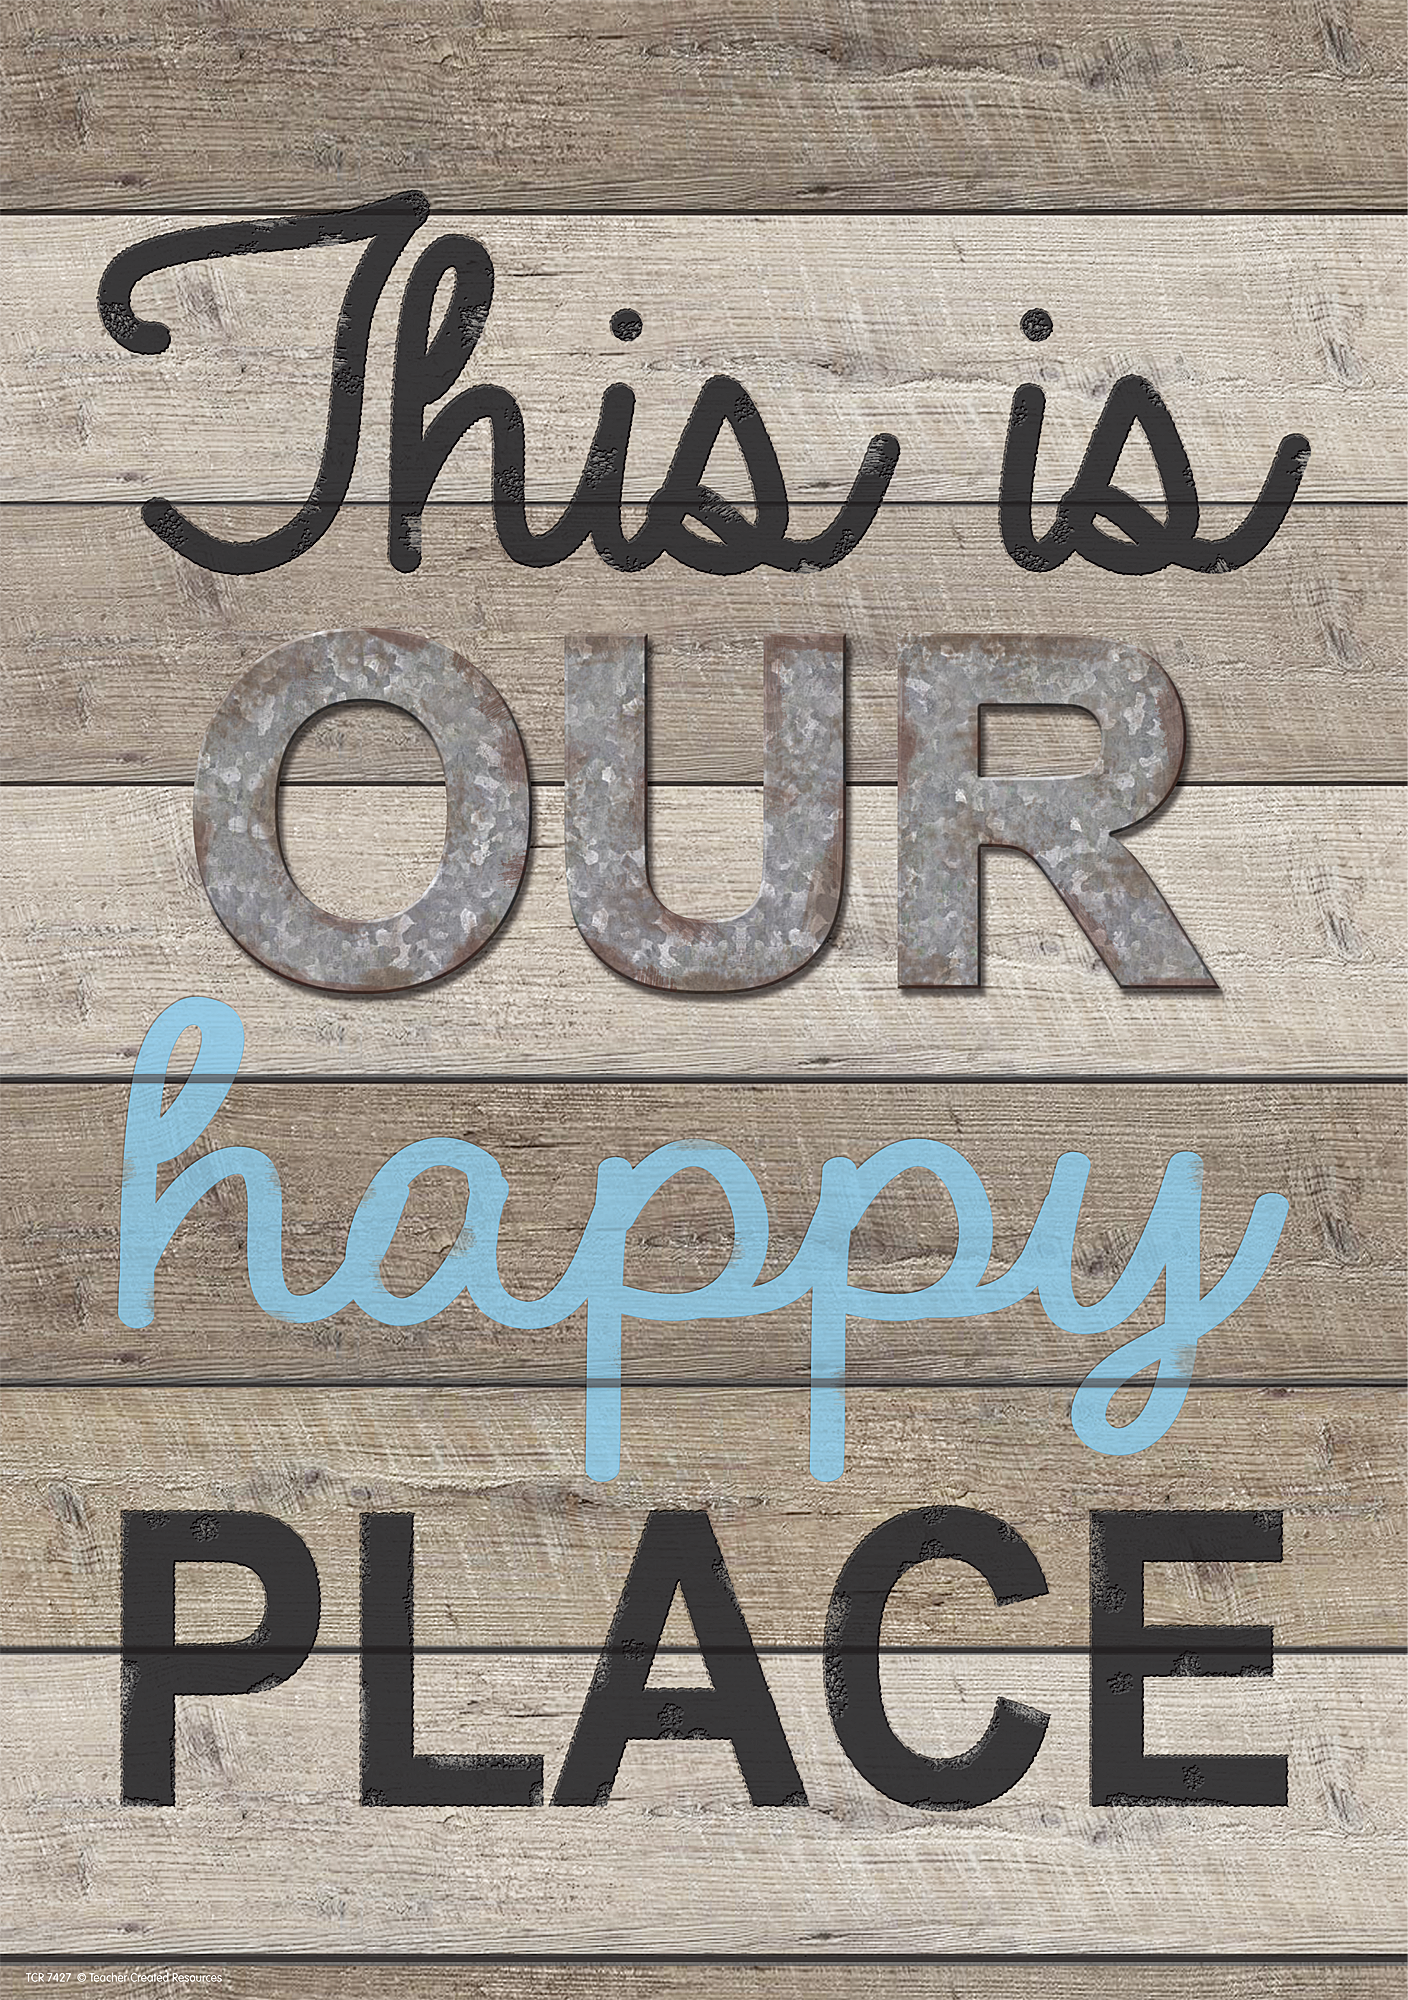 This Is Our Happy Place Positive Poster